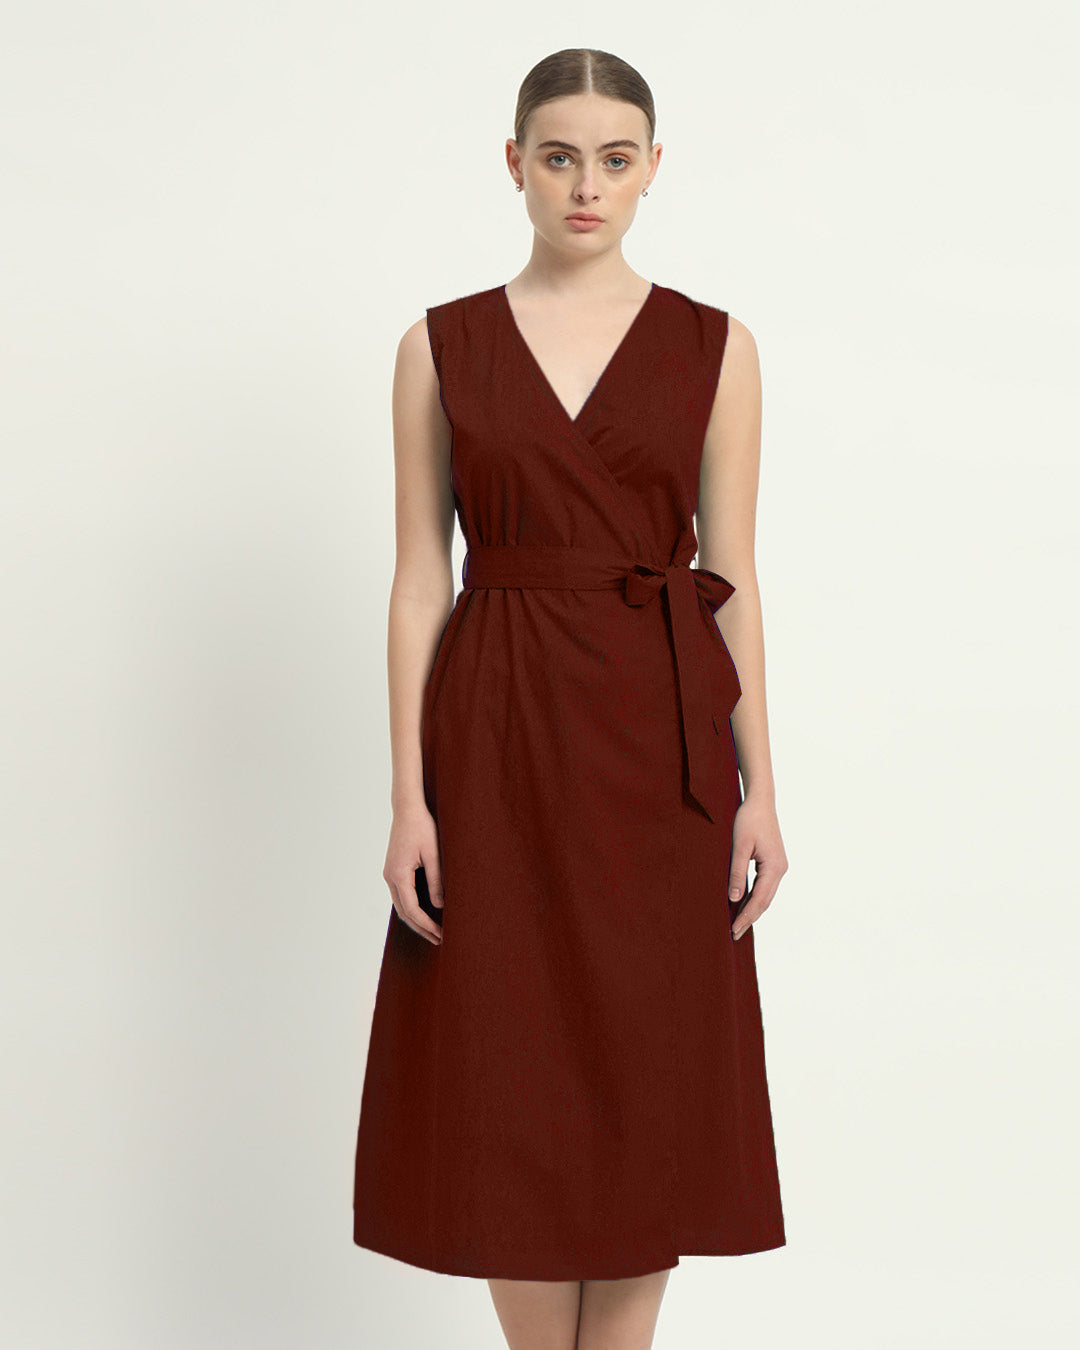 The Rouge Windsor Cotton Dress